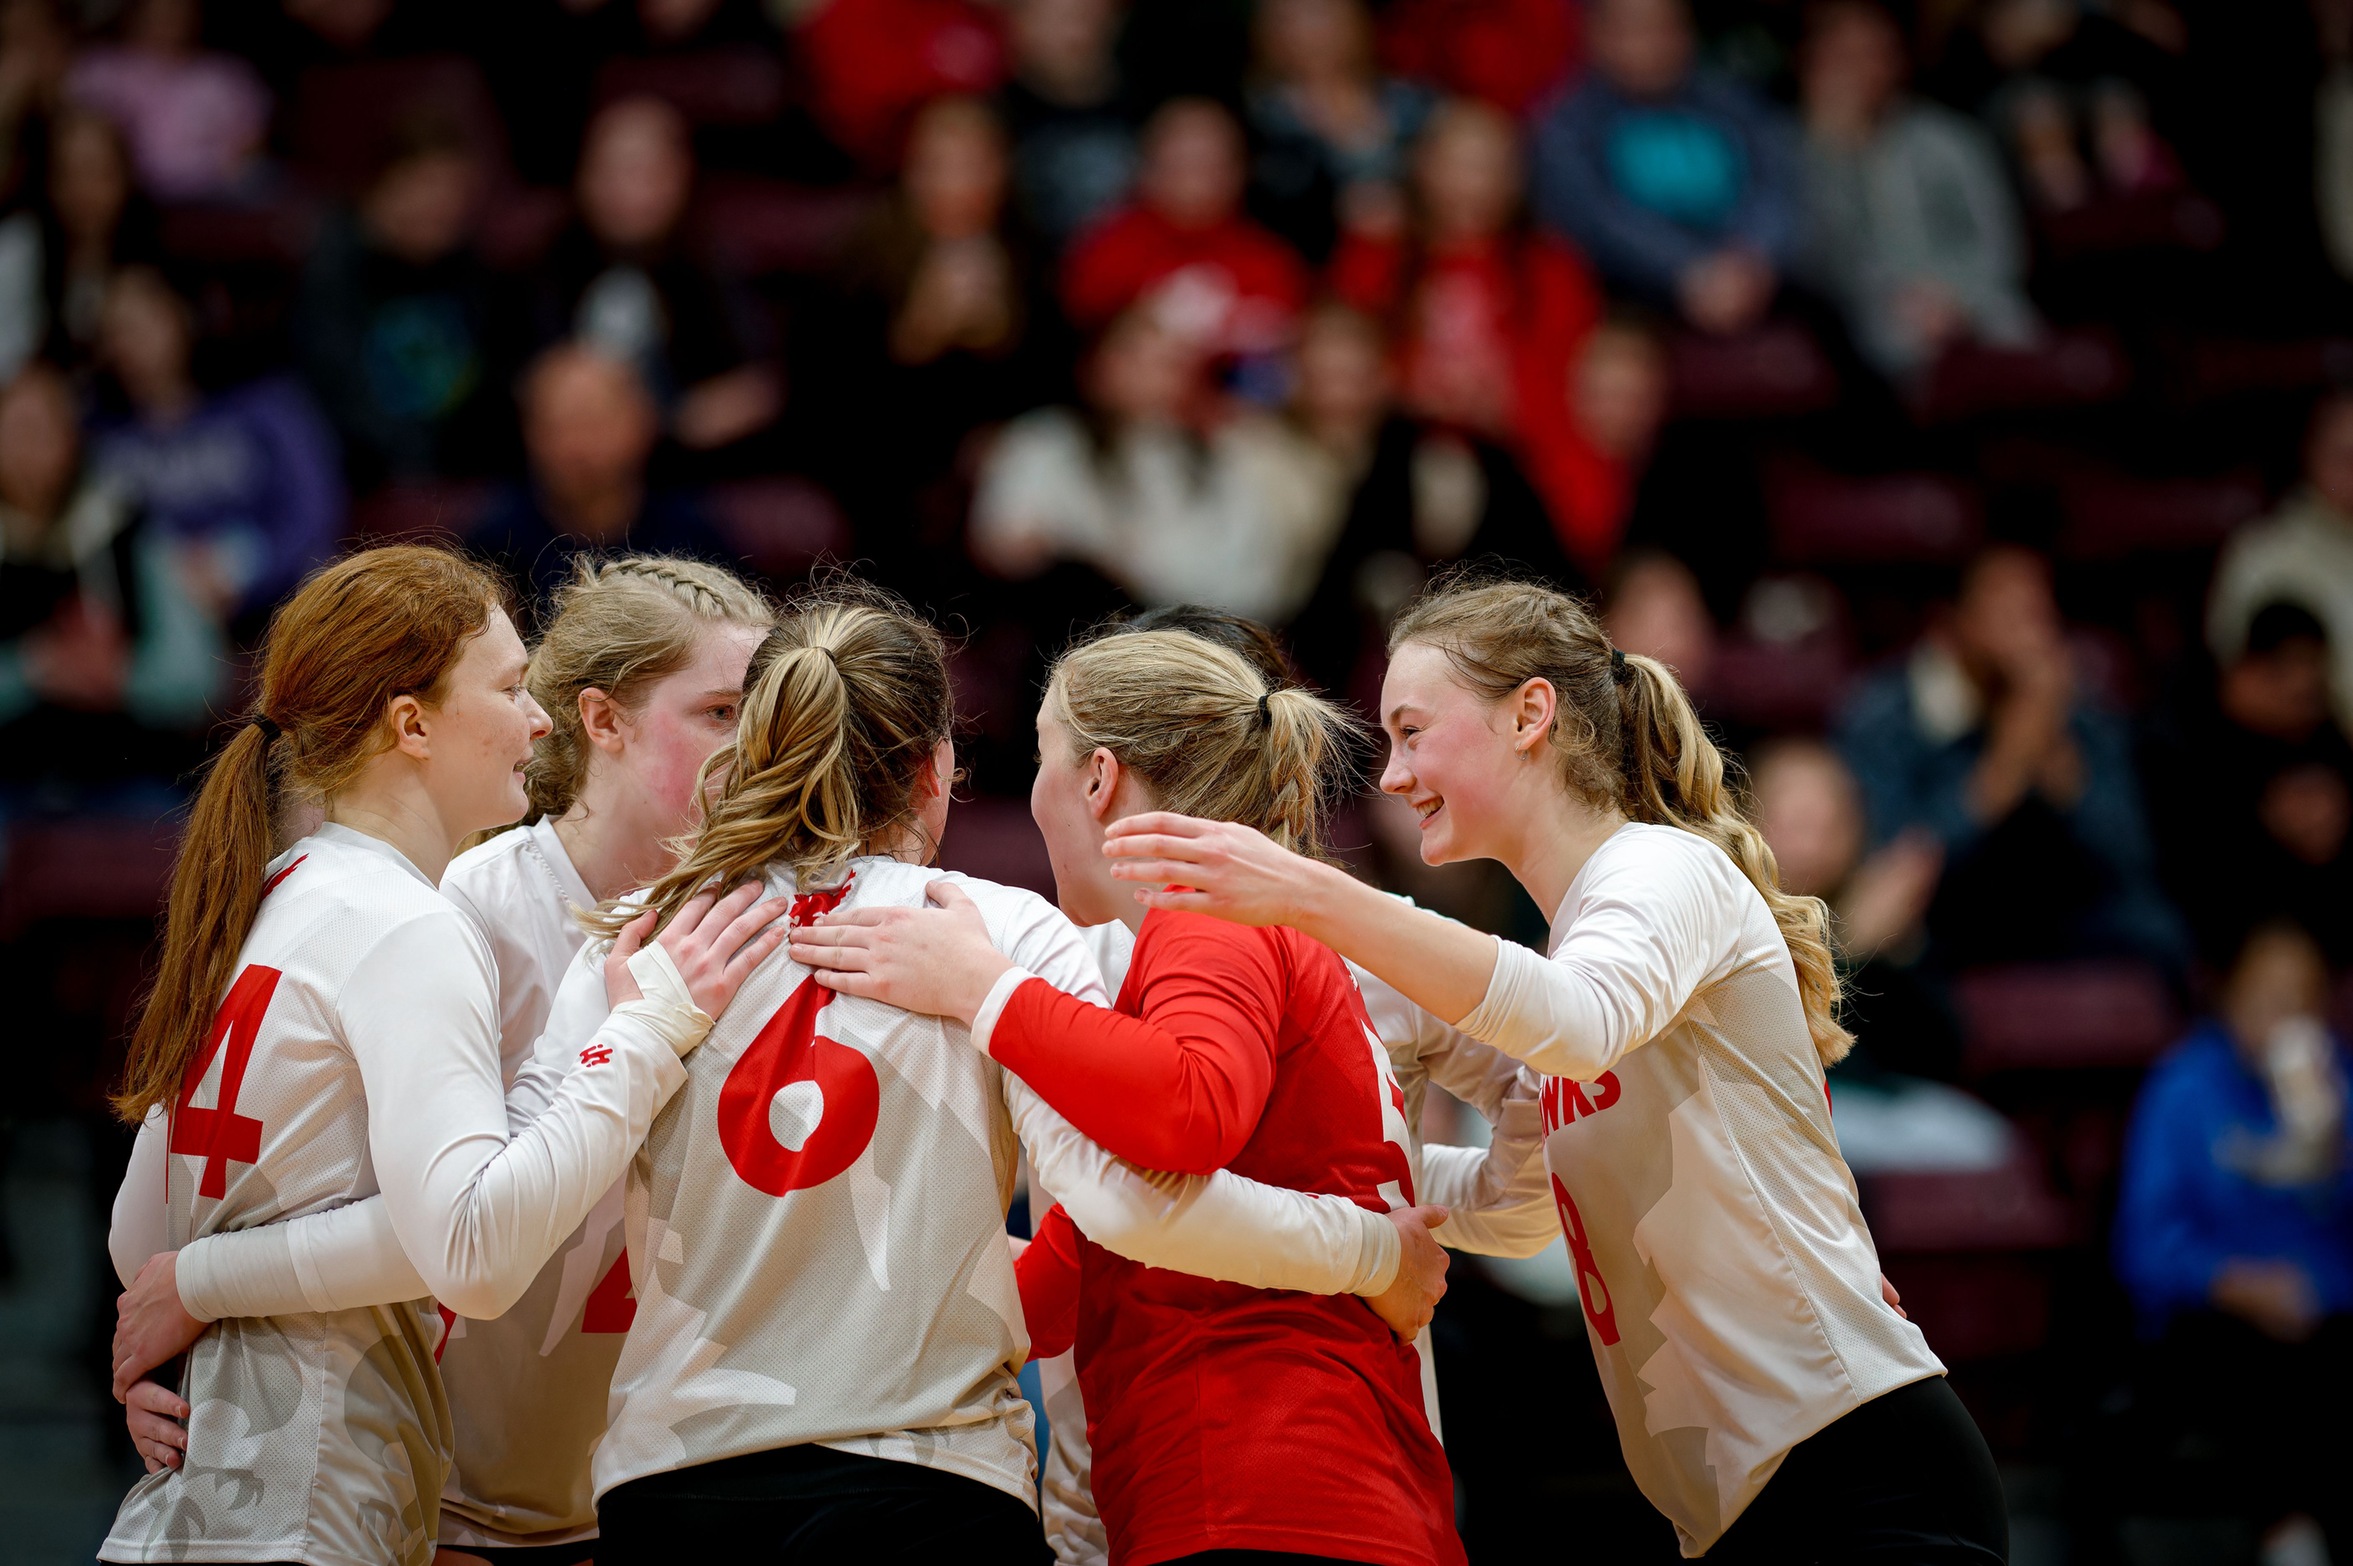 Sea-Hawks Host last at Home Weekend Before the New Year